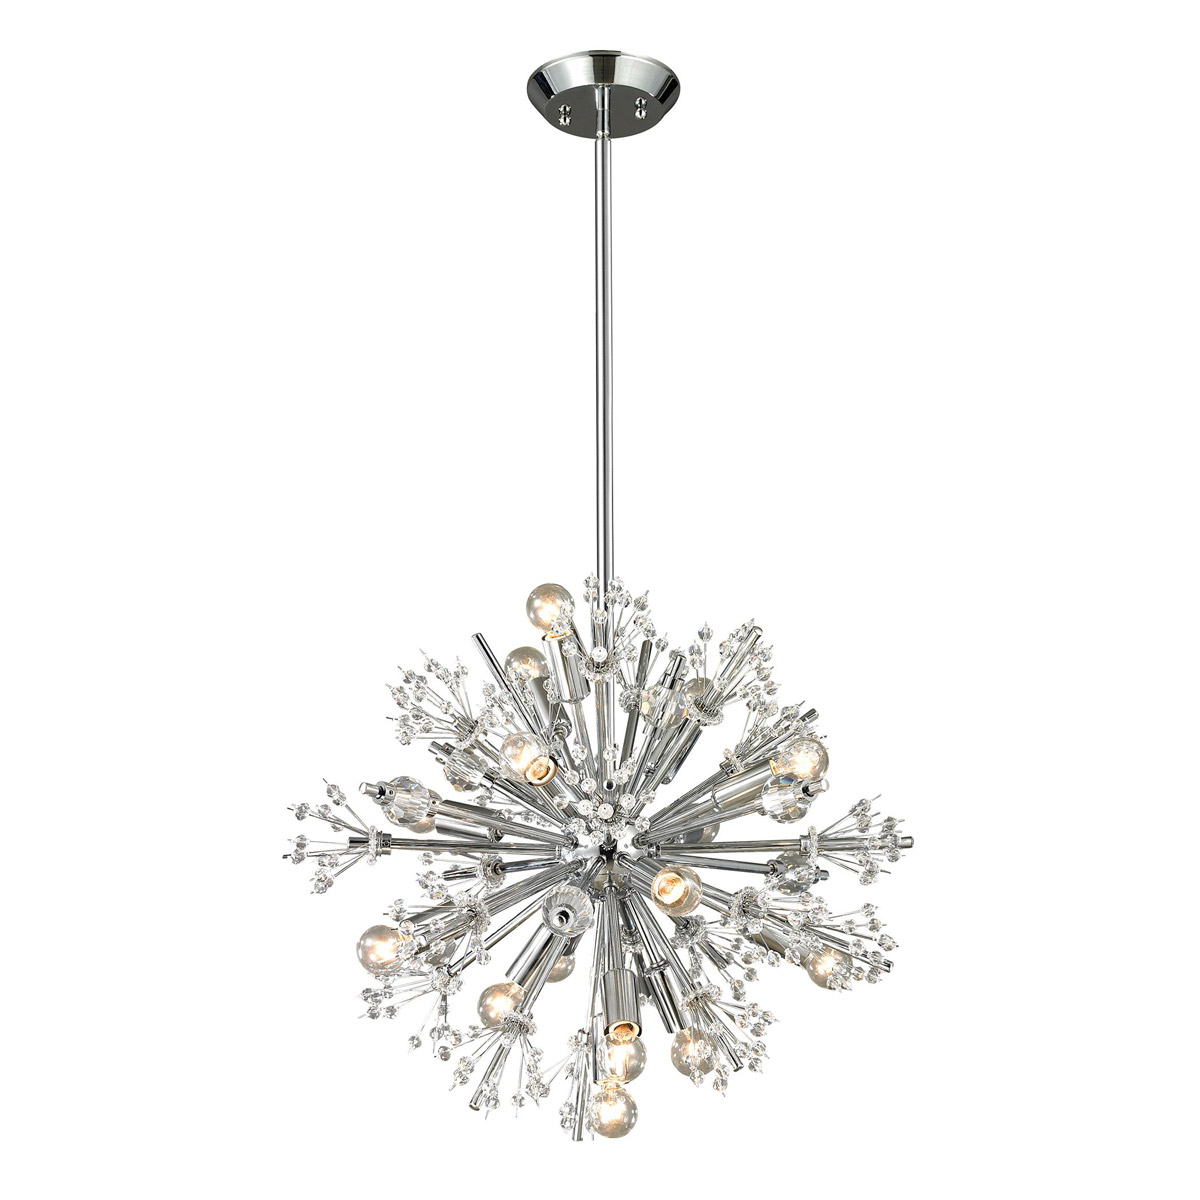 ELK Lighting Chandeliers for Sale, Furniture by ABD, Accentuations Brand  